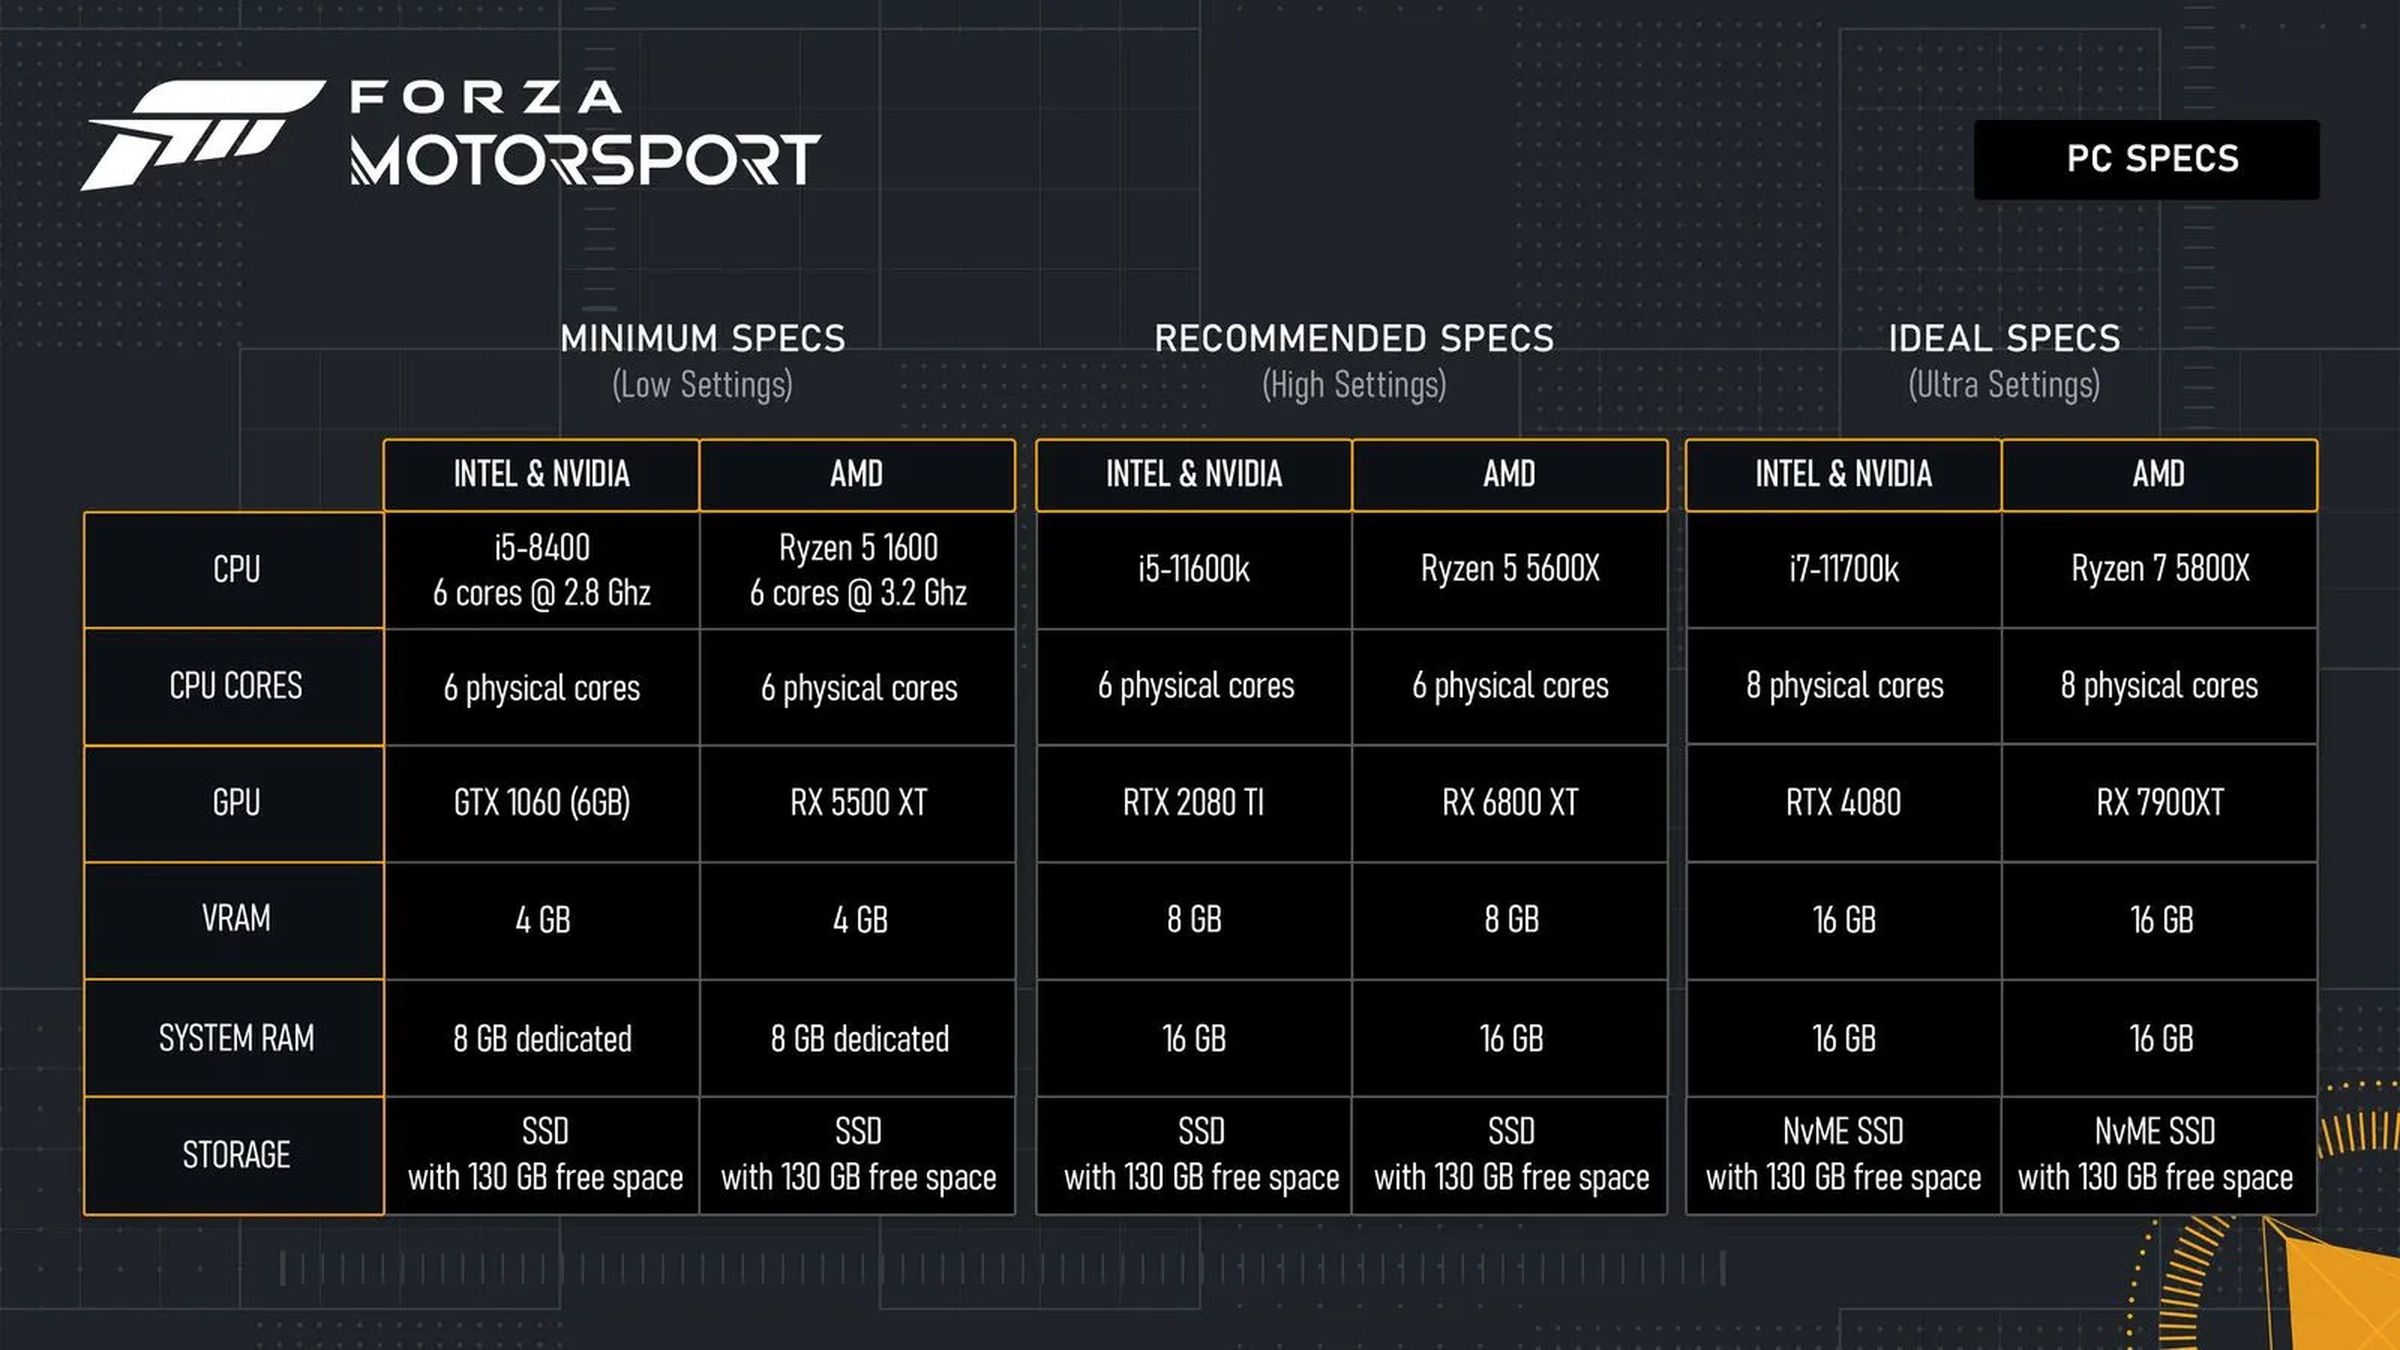 Here’s the full chart of recommended specs.